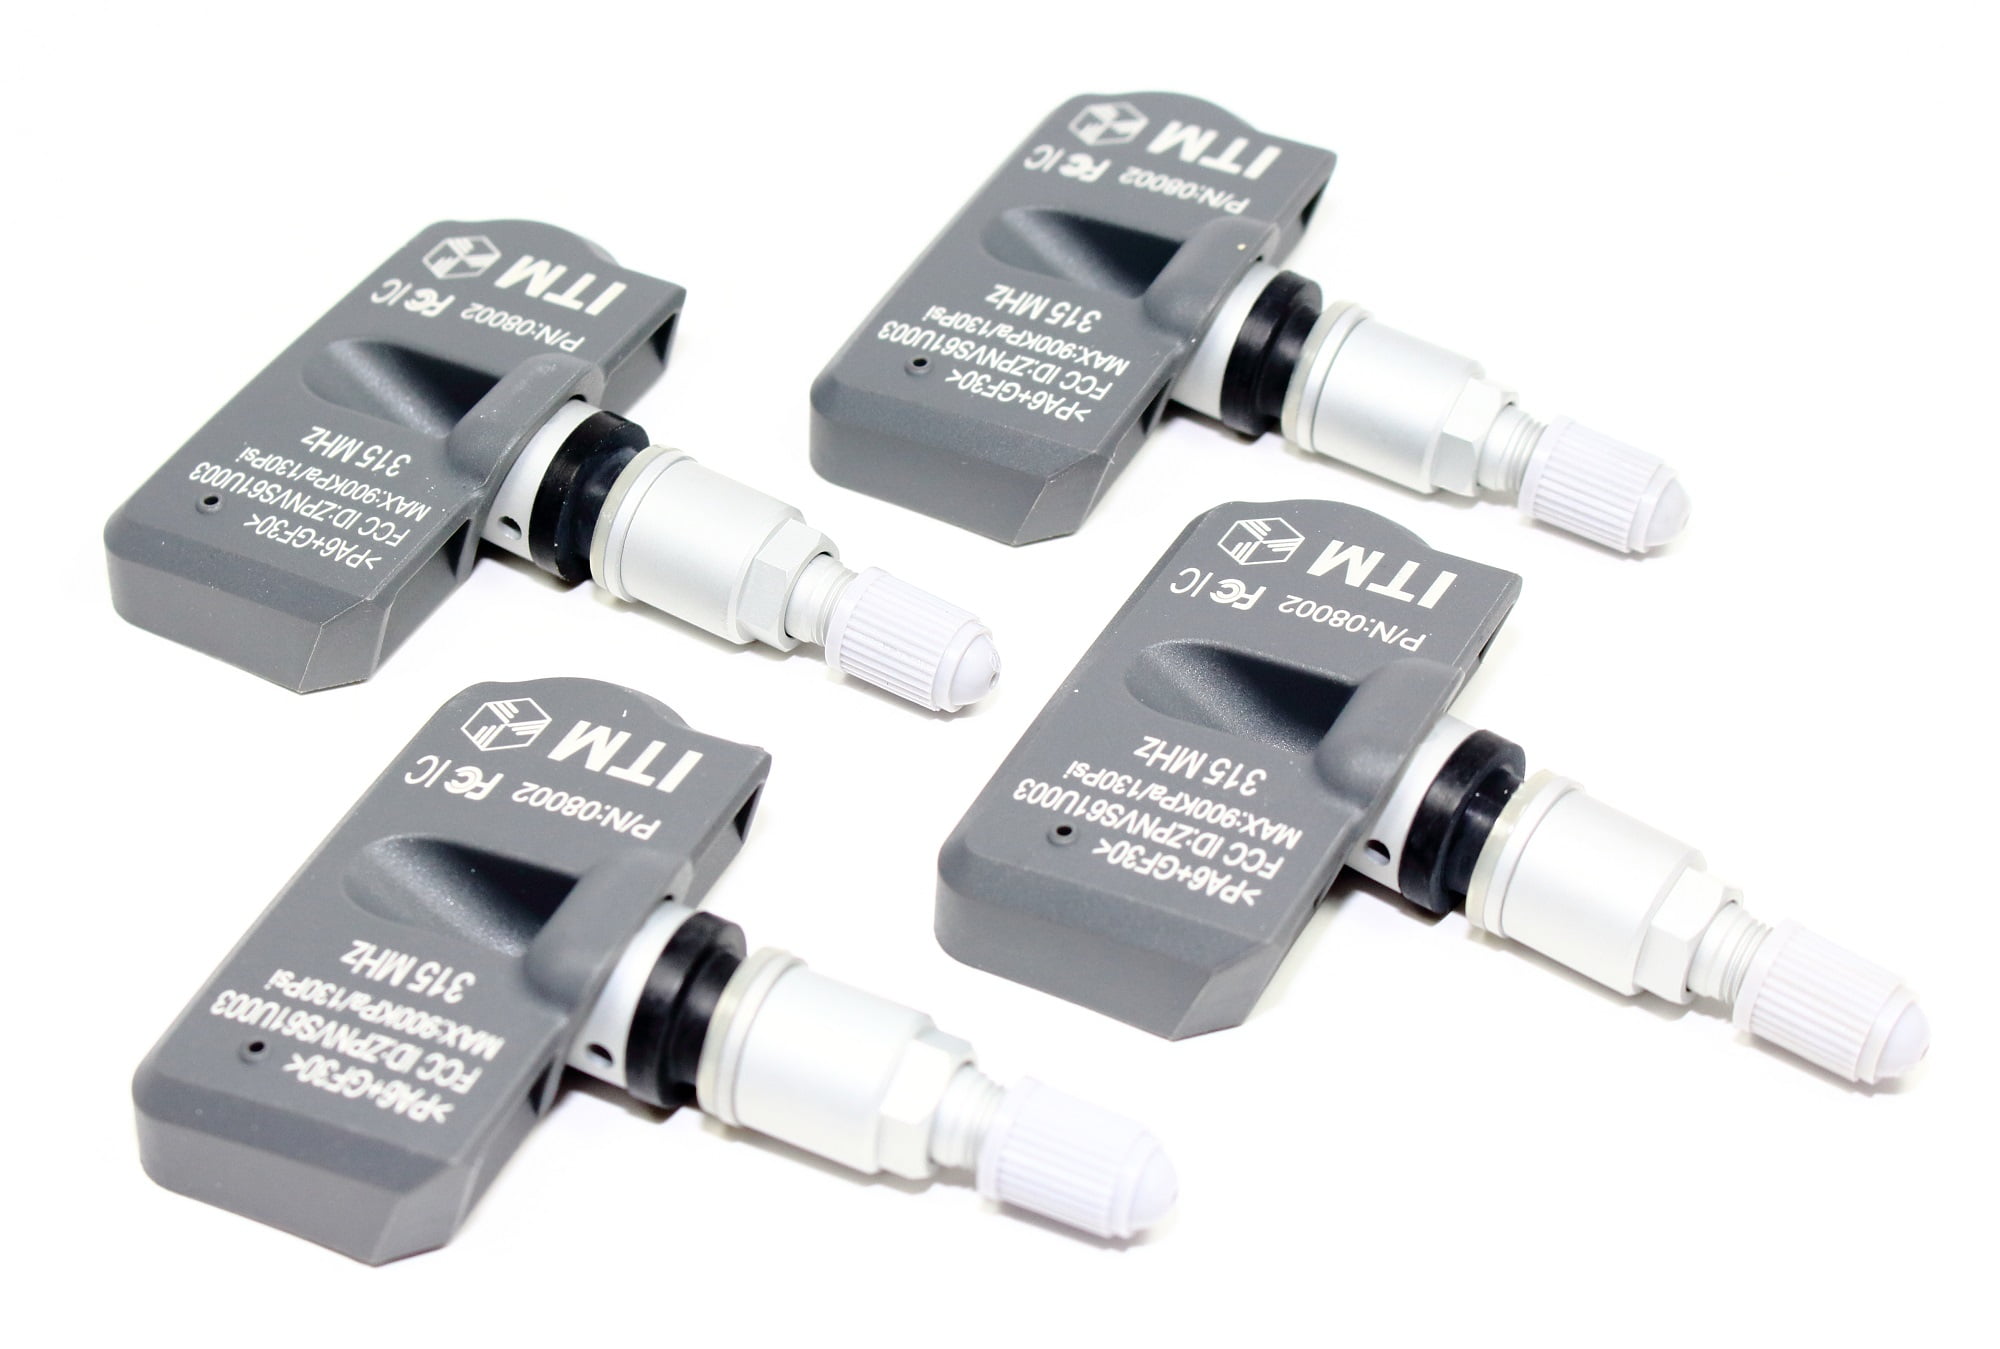 ITM Set of 4 315mhz TPMS Tire Pressure Sensors 2005 2006 2007 2008 Acura TL Replacement 